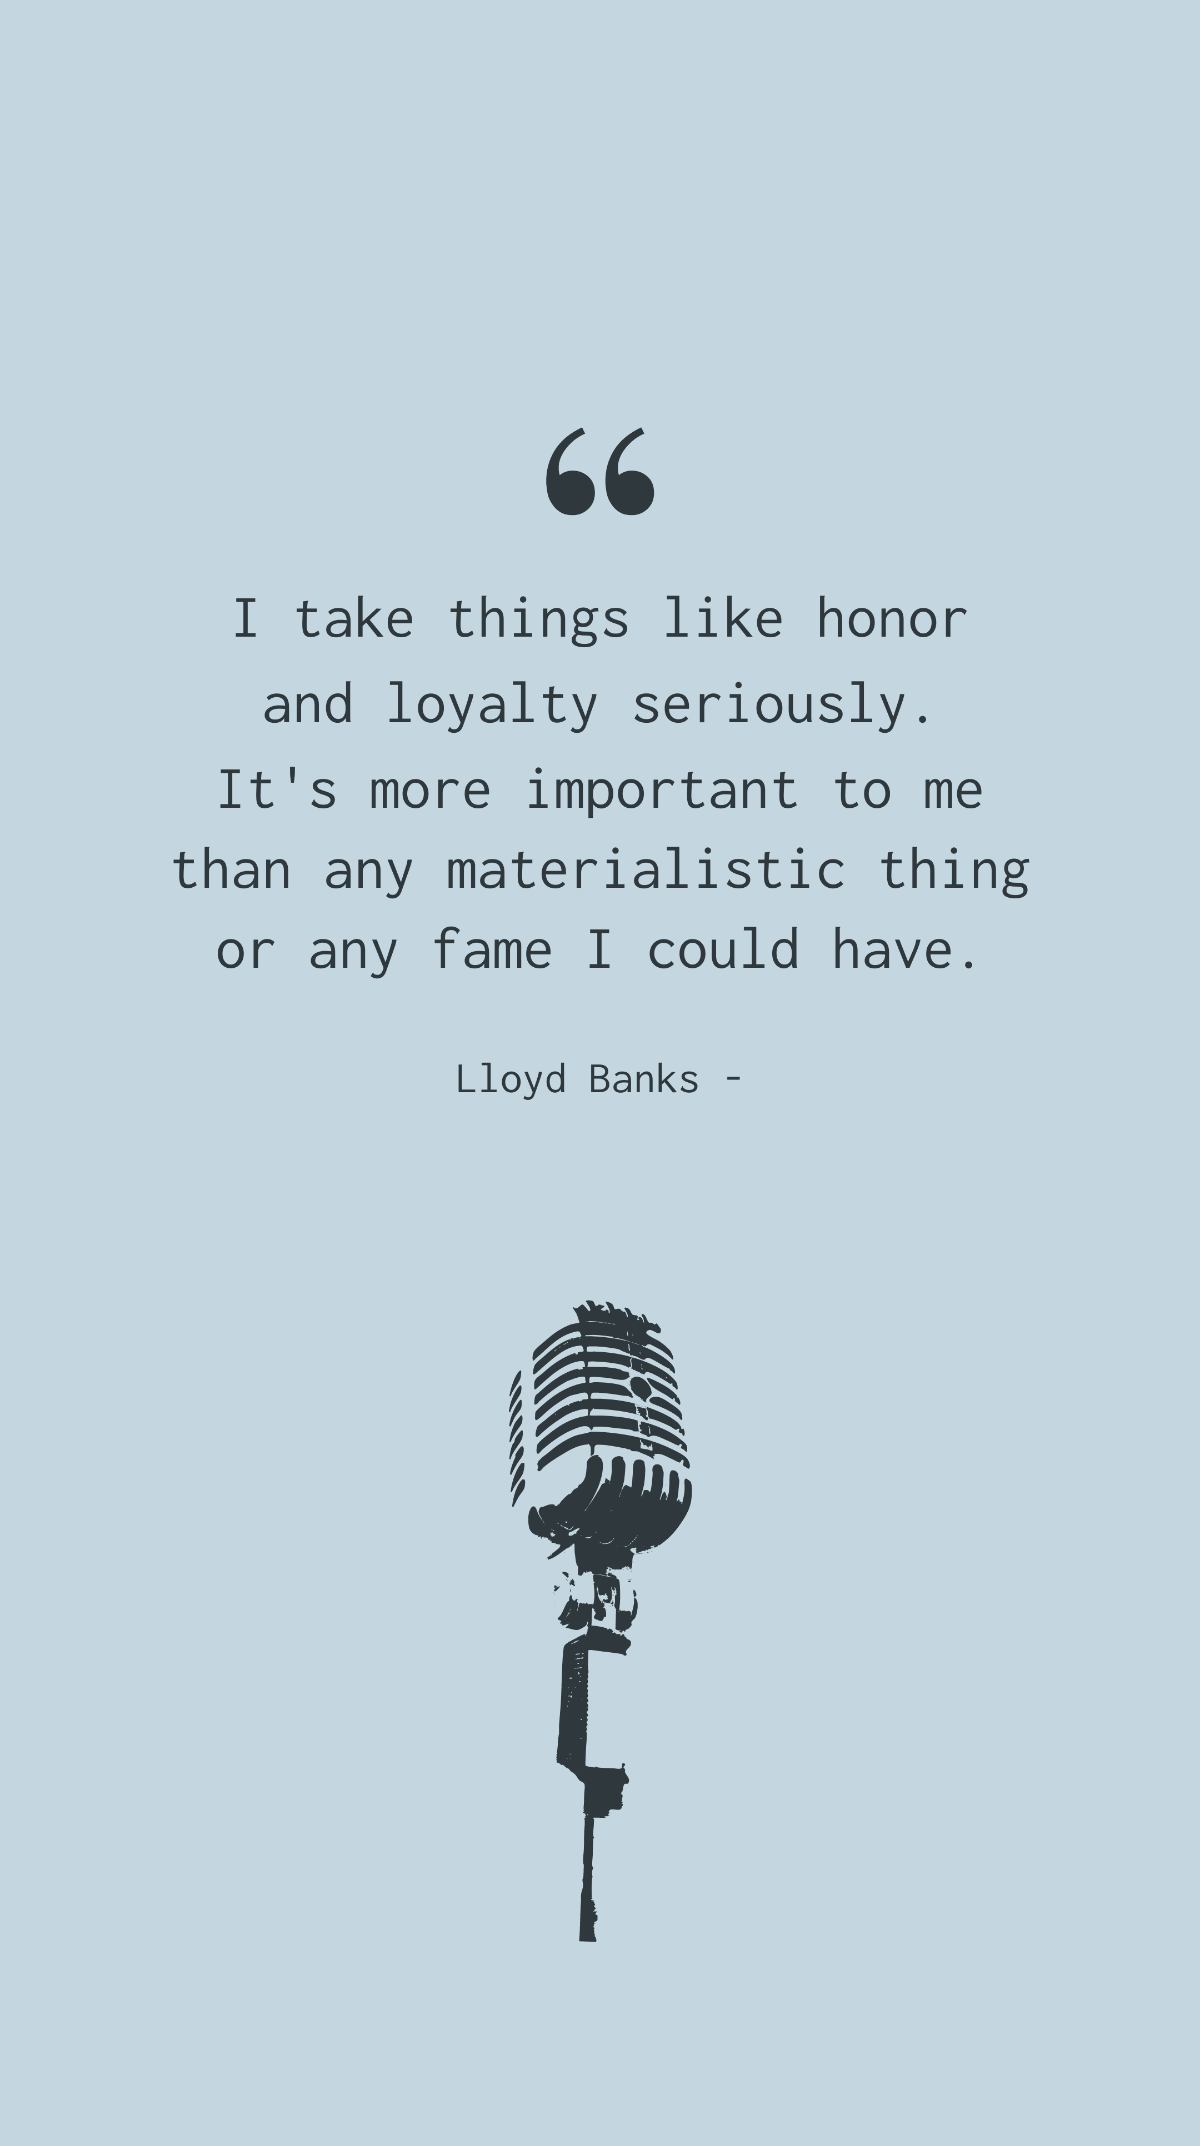 Lloyd Banks - I take things like honor and loyalty seriously. It's more important to me than any materialistic thing or any fame I could have. Template